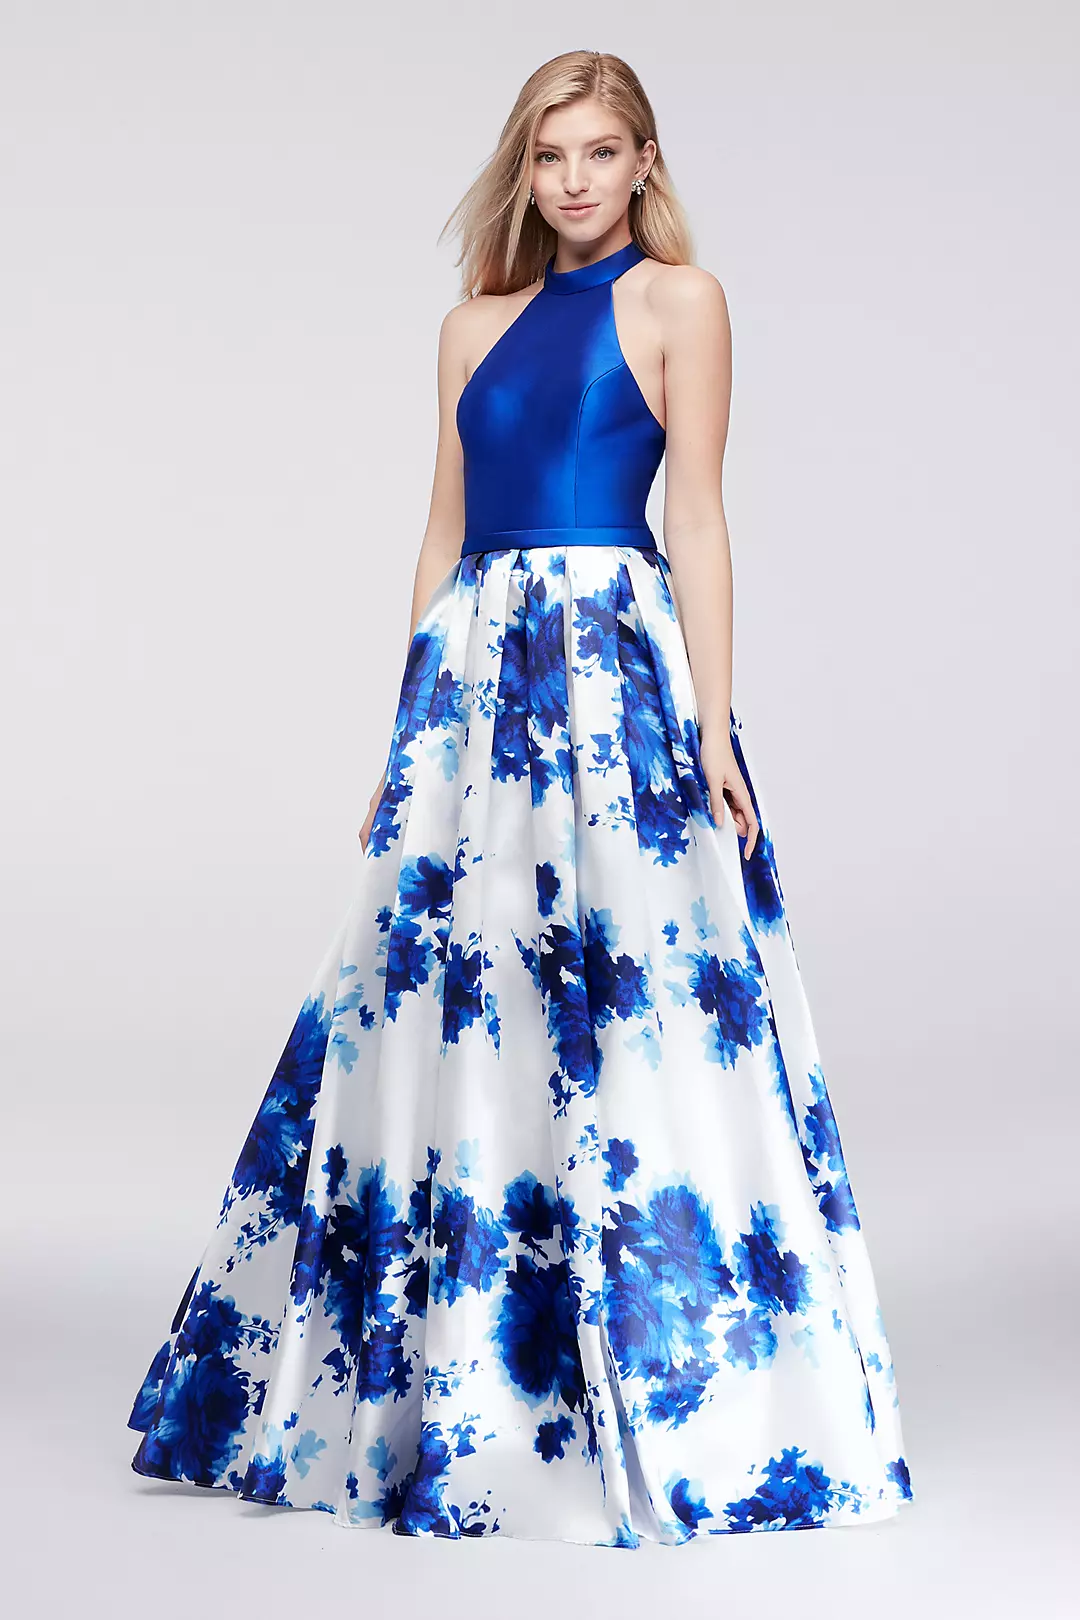 Mikado Halter Ball Gown with Floral-Print Skirt Image